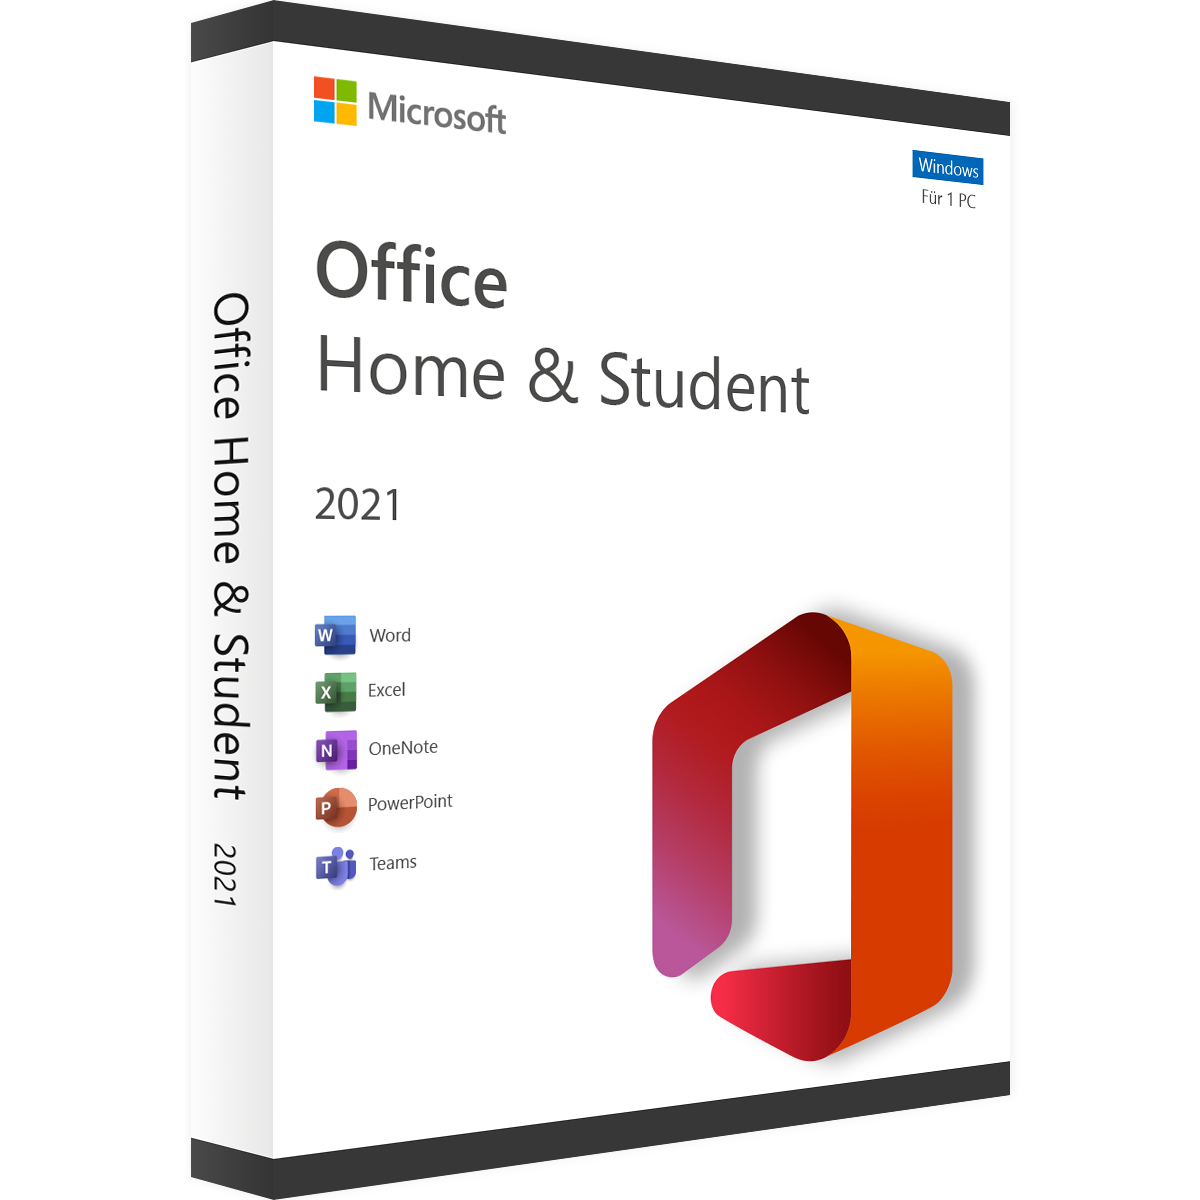 Microsoft Office 2021 Home and Student kaufen | Best-Software.de